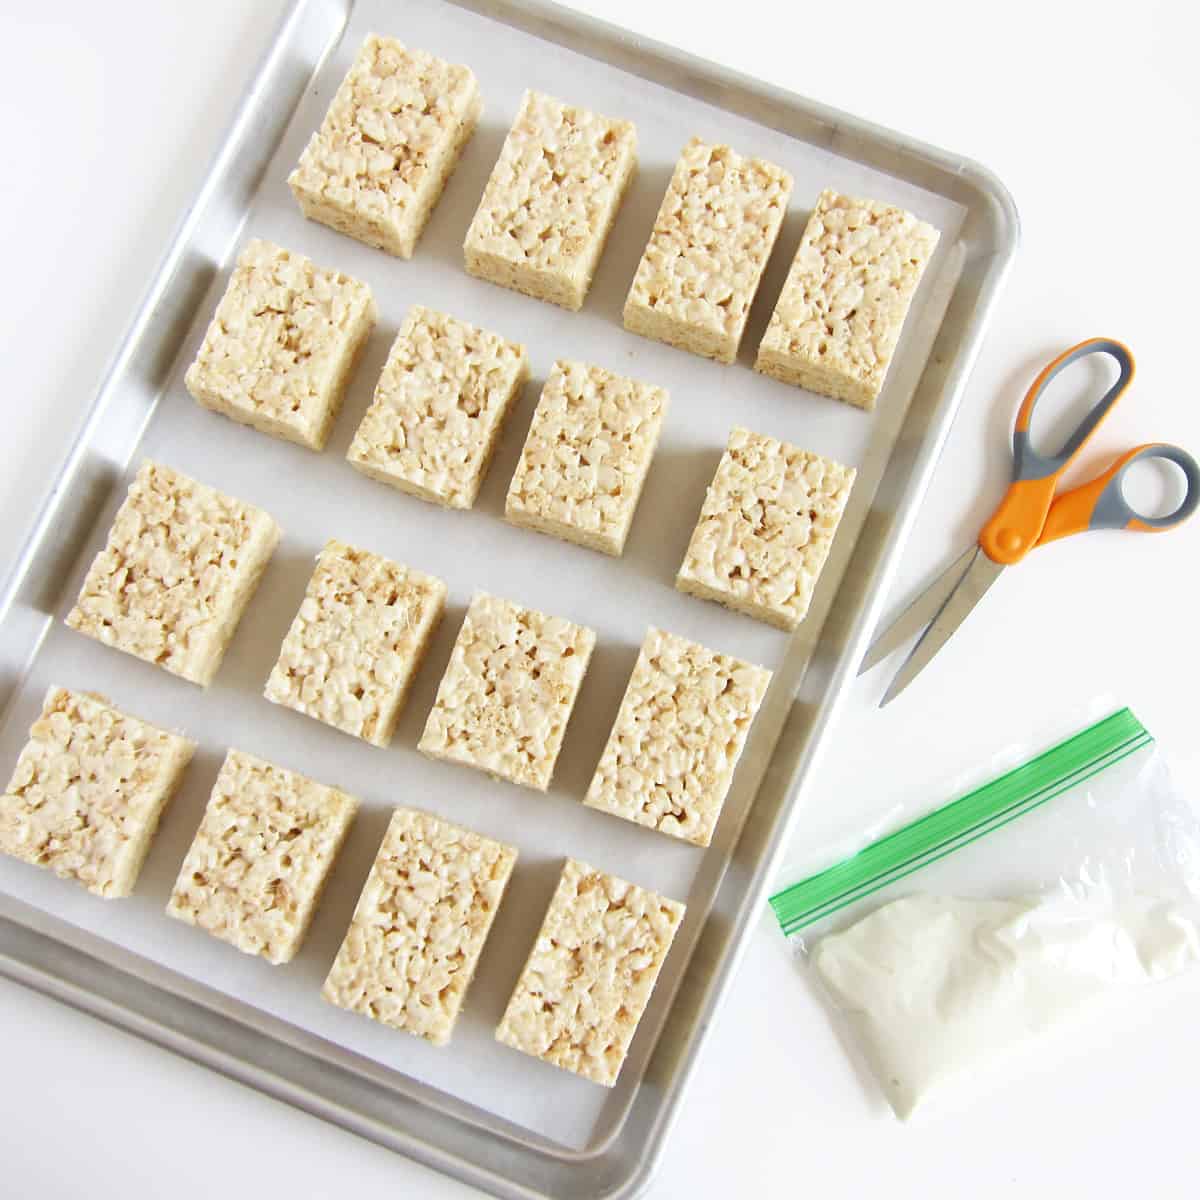 white chocolate rice crispy treats on a tray next to a pair of scissors and a zip-top bag of melted white chocolate